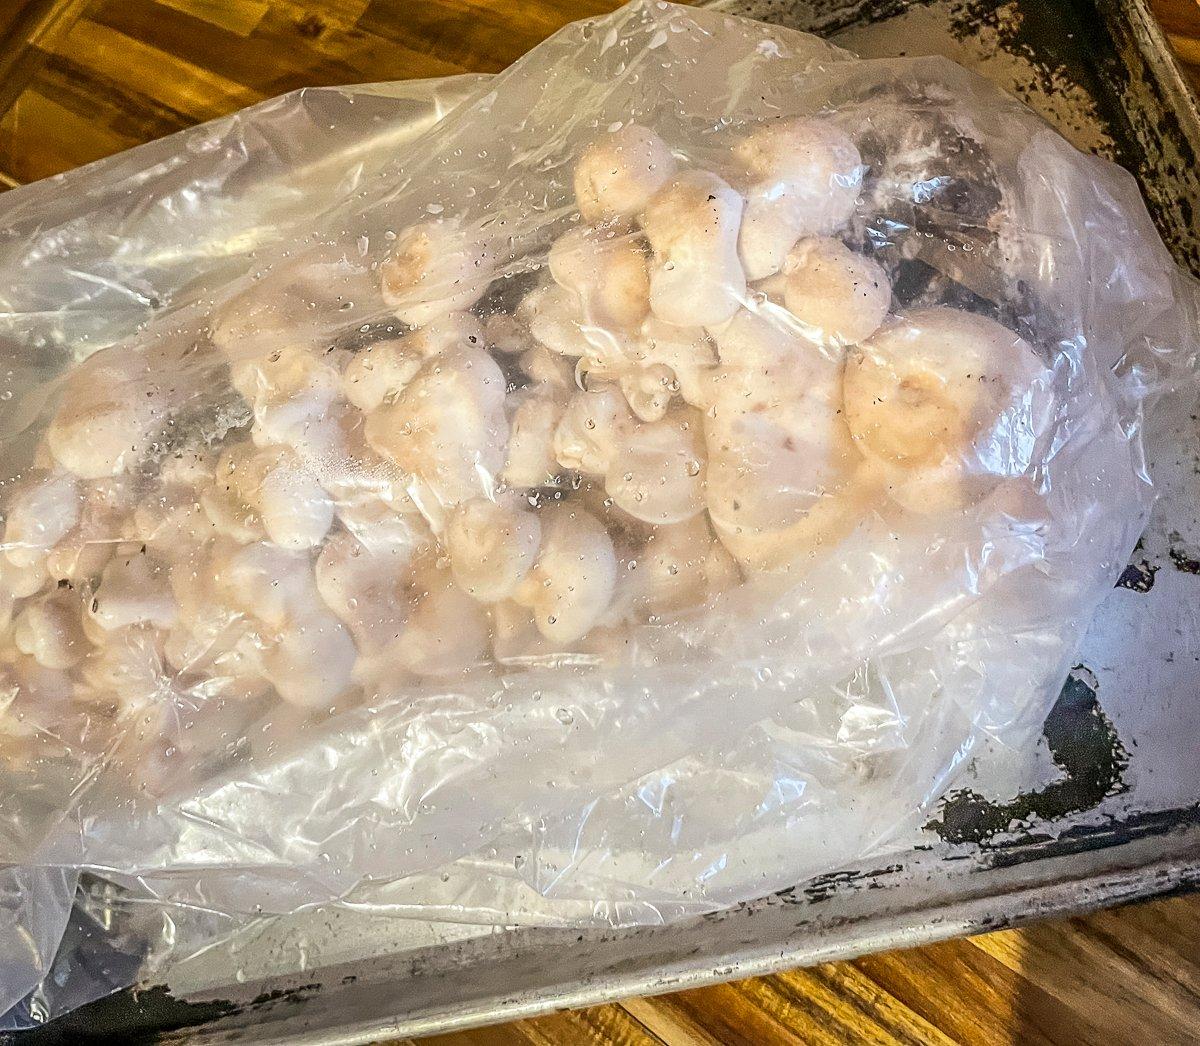 A plastic bag is often used to hold moisture around the mushrooms while they grow.